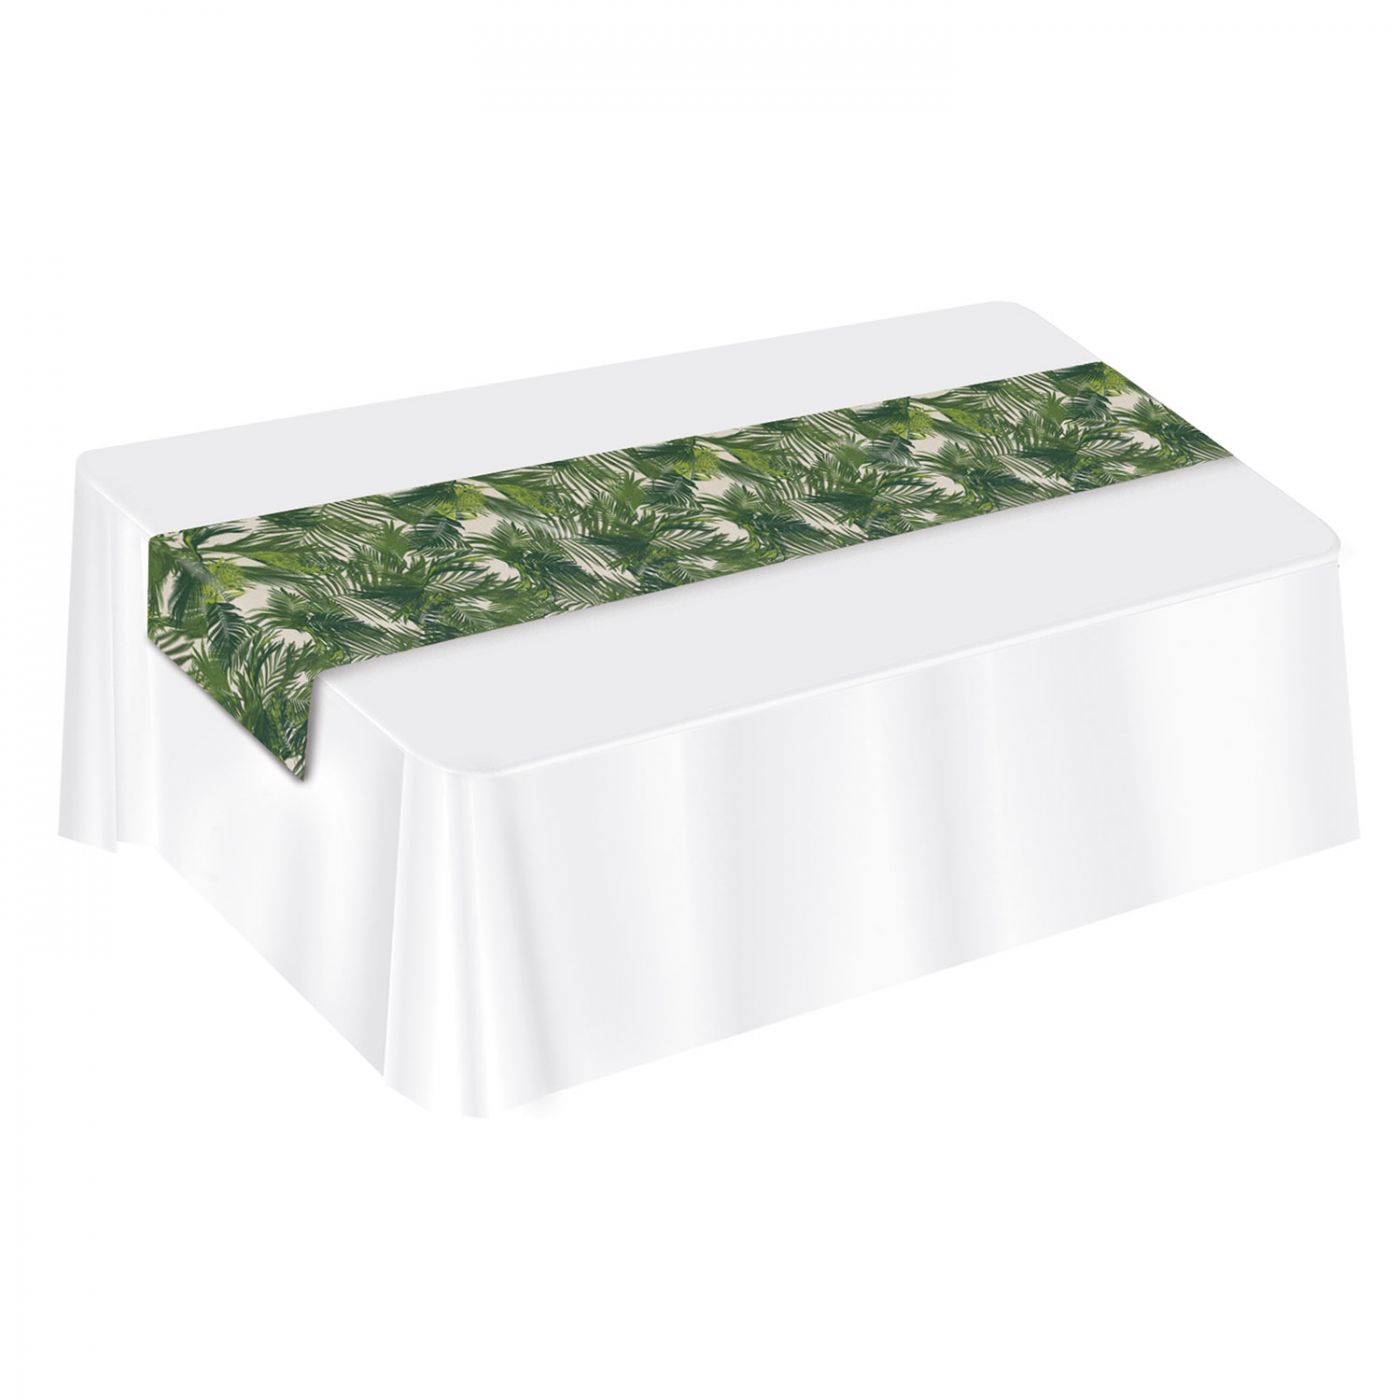 Palm Leaf Fabric Table Runner image